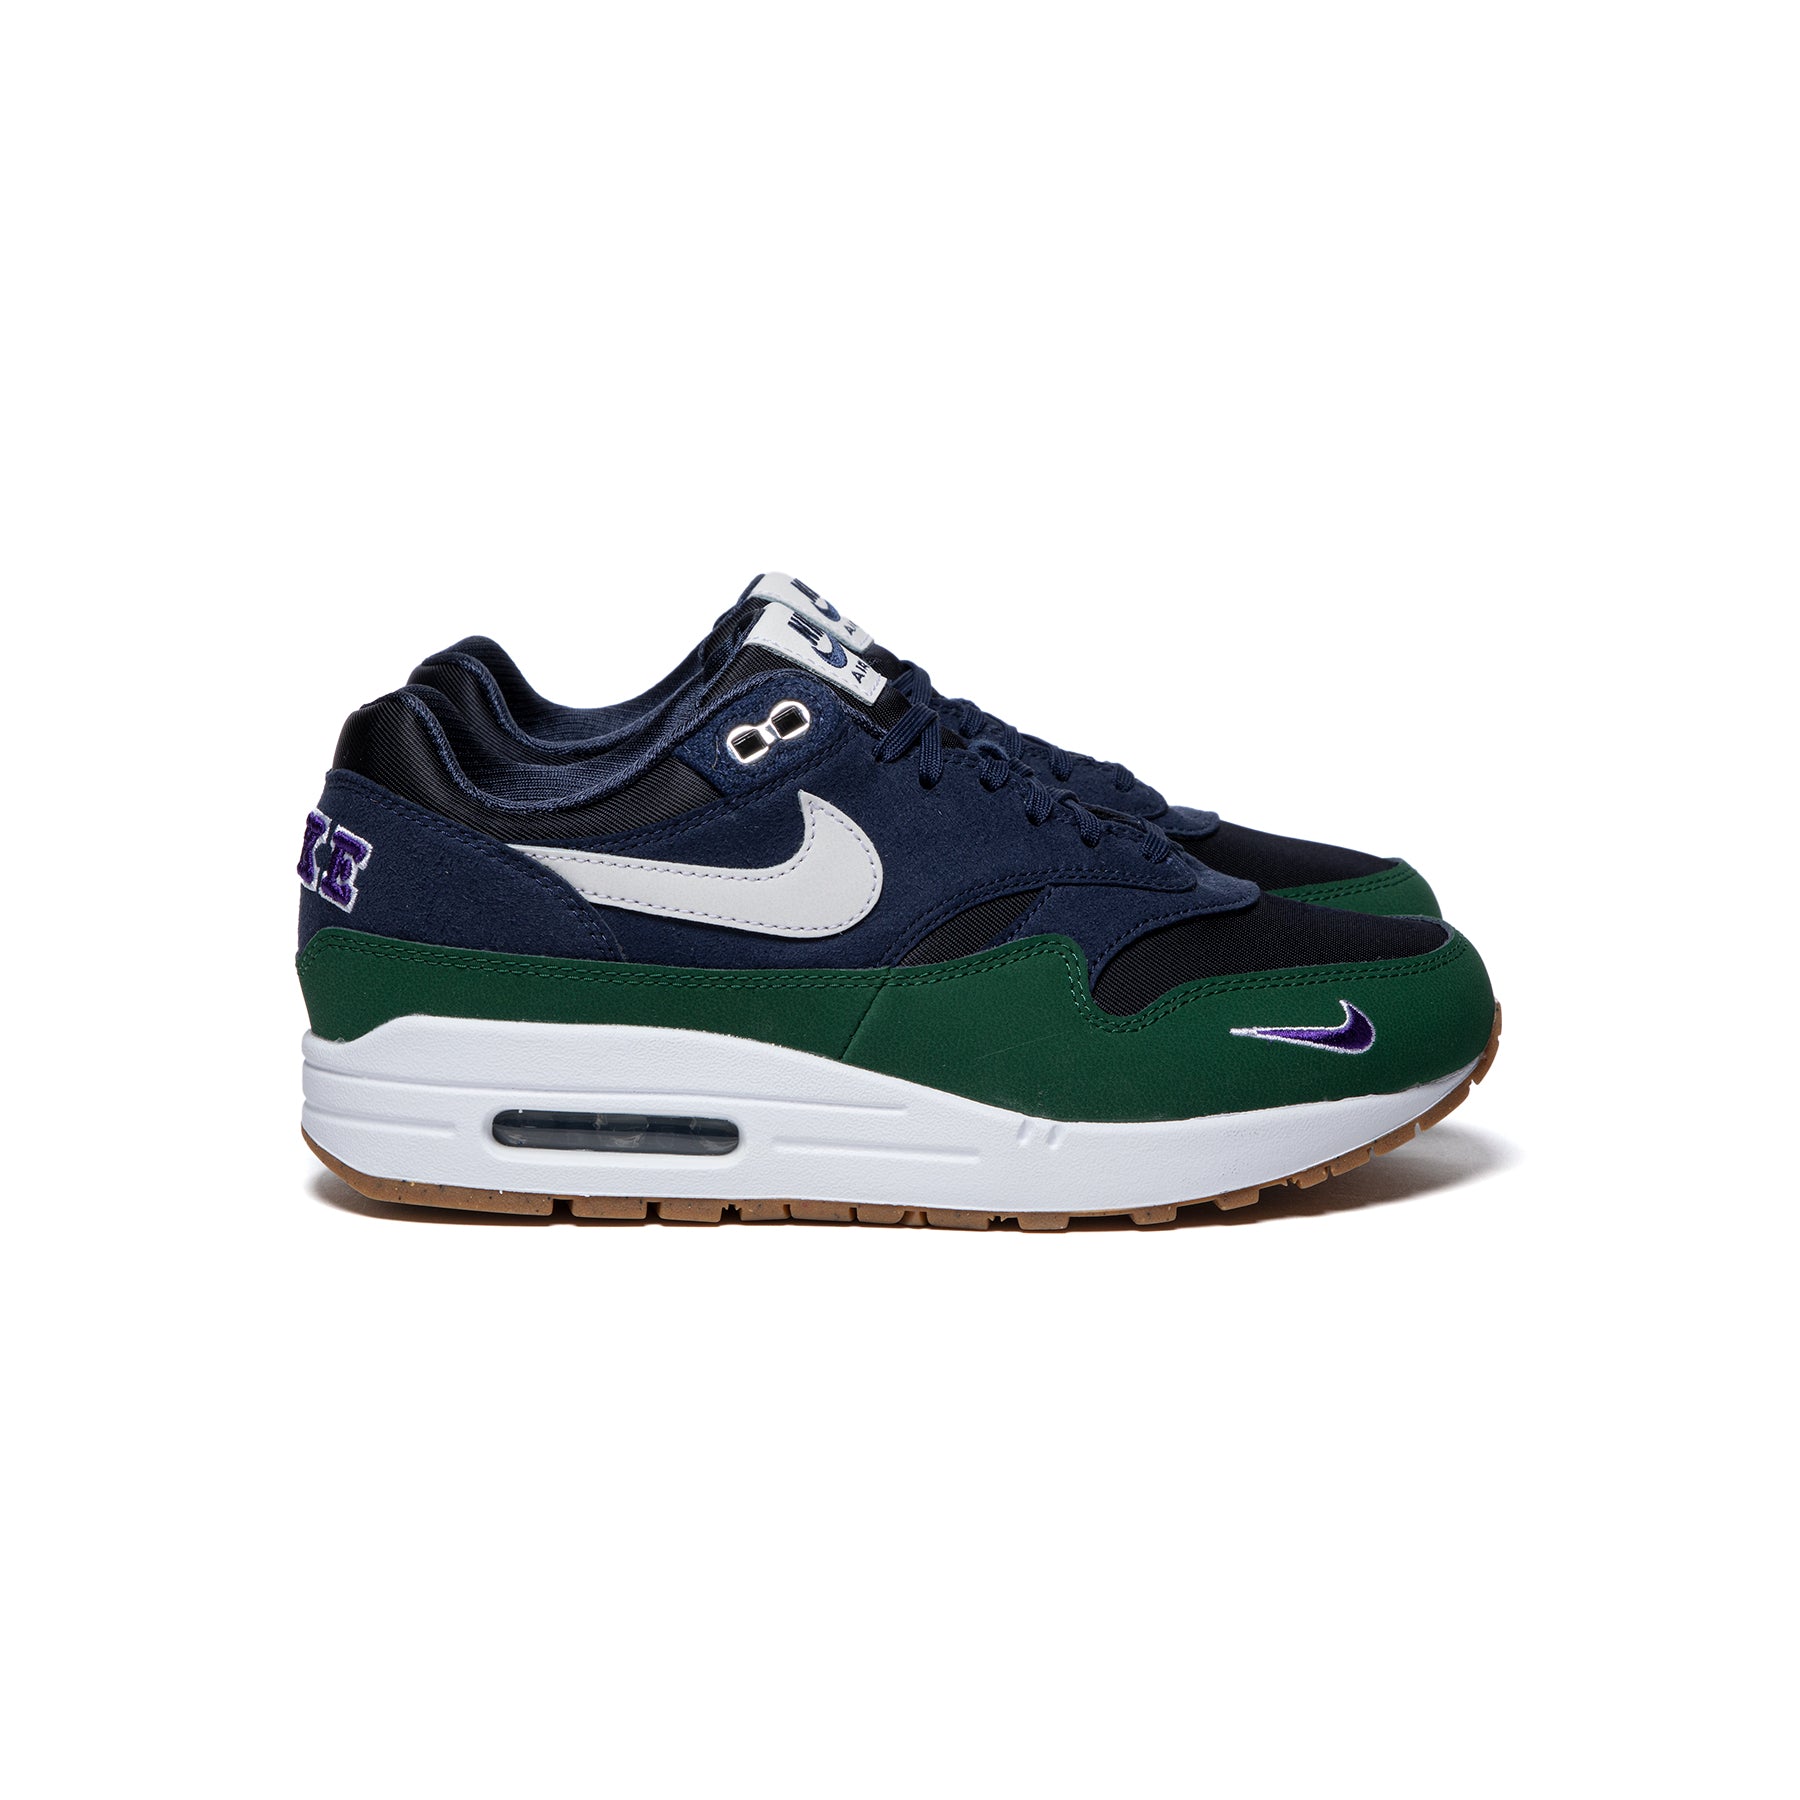 Snel verbannen Over het algemeen Nike Womens Air Max 1 '87 QS (Obsidian/Midnight Navy/Gorge Green) – Concepts